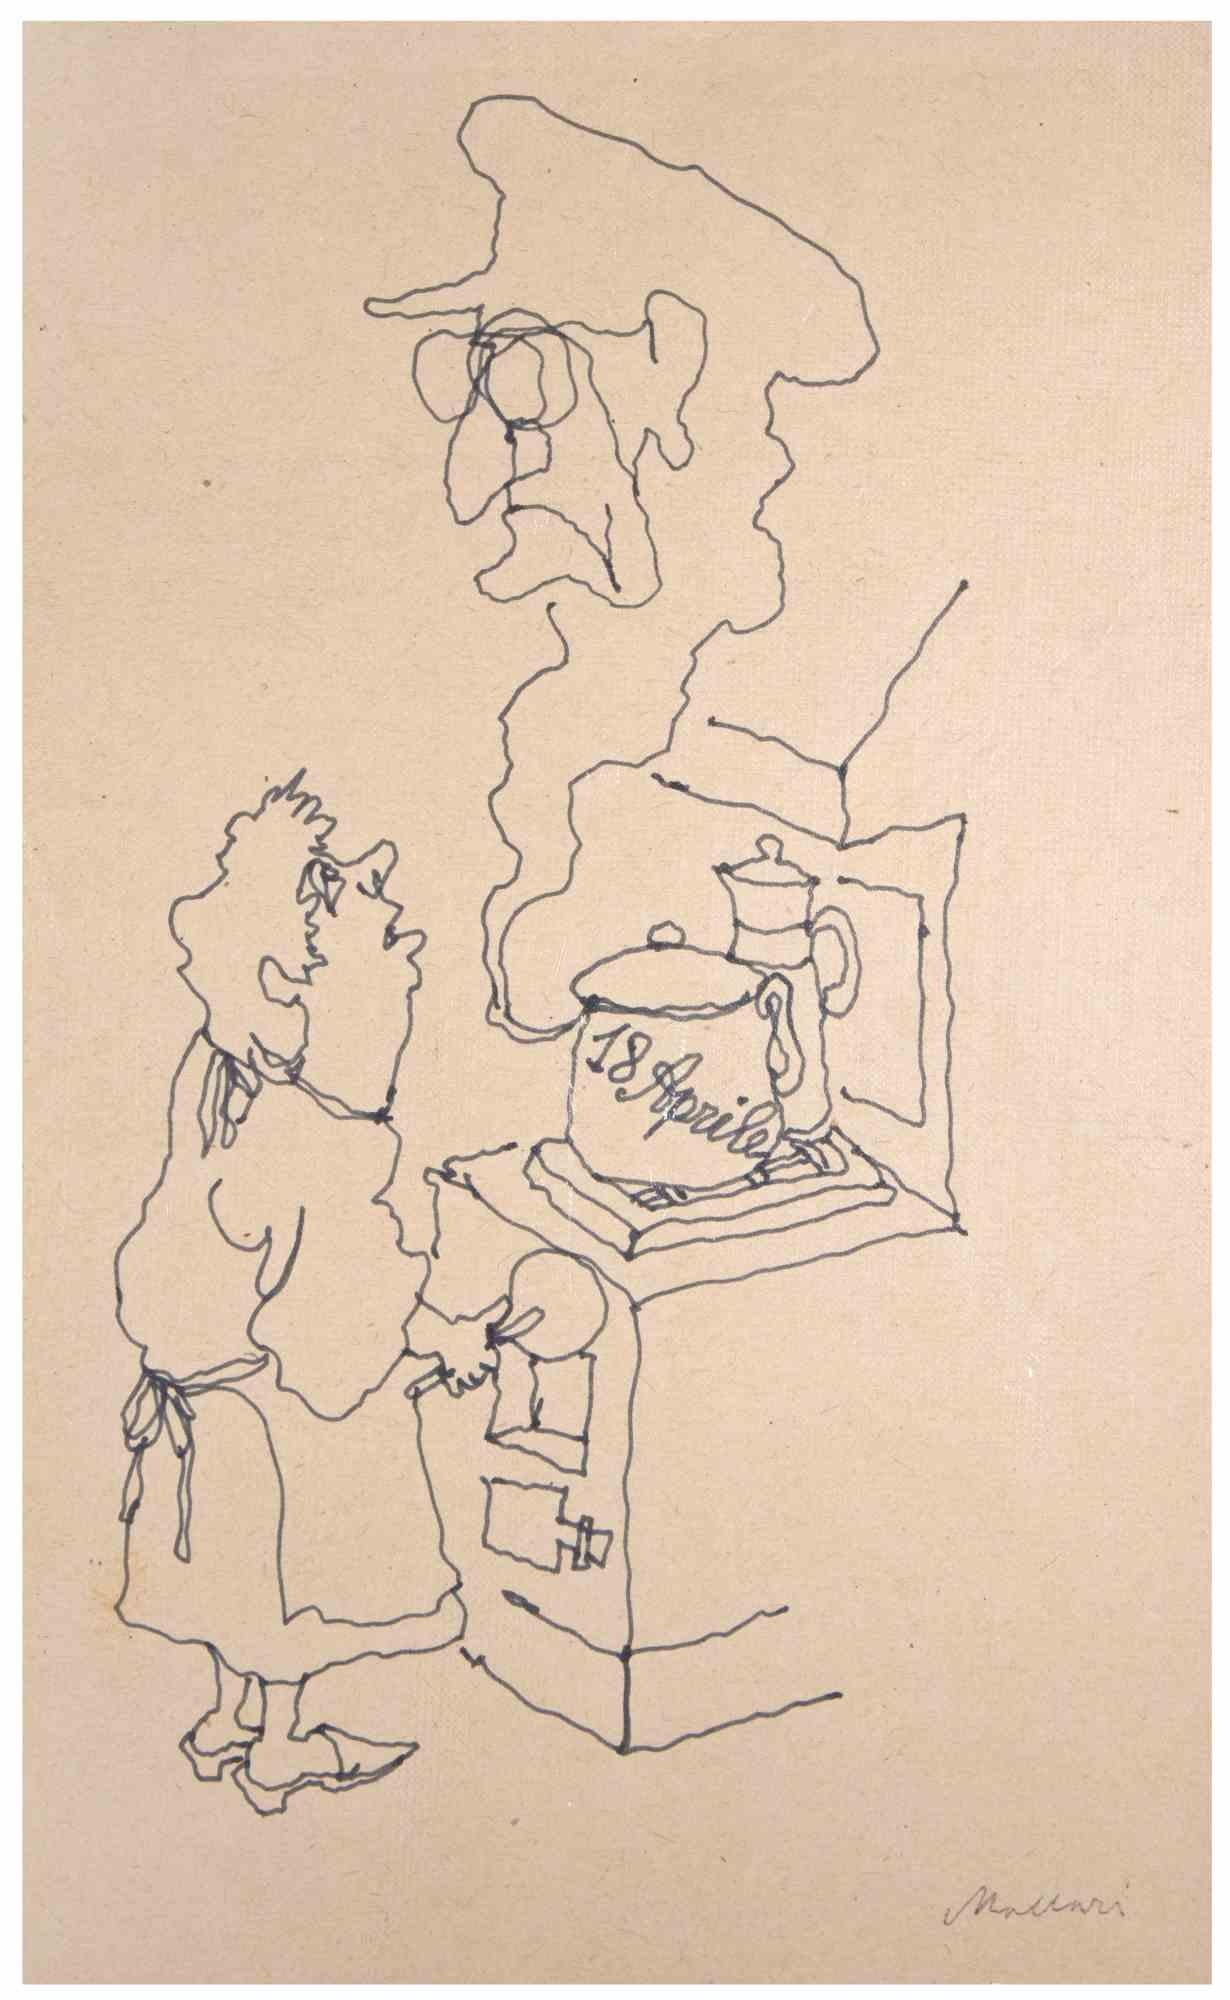 Appearance - Drawing by Mino Maccari - Mid-20th Century